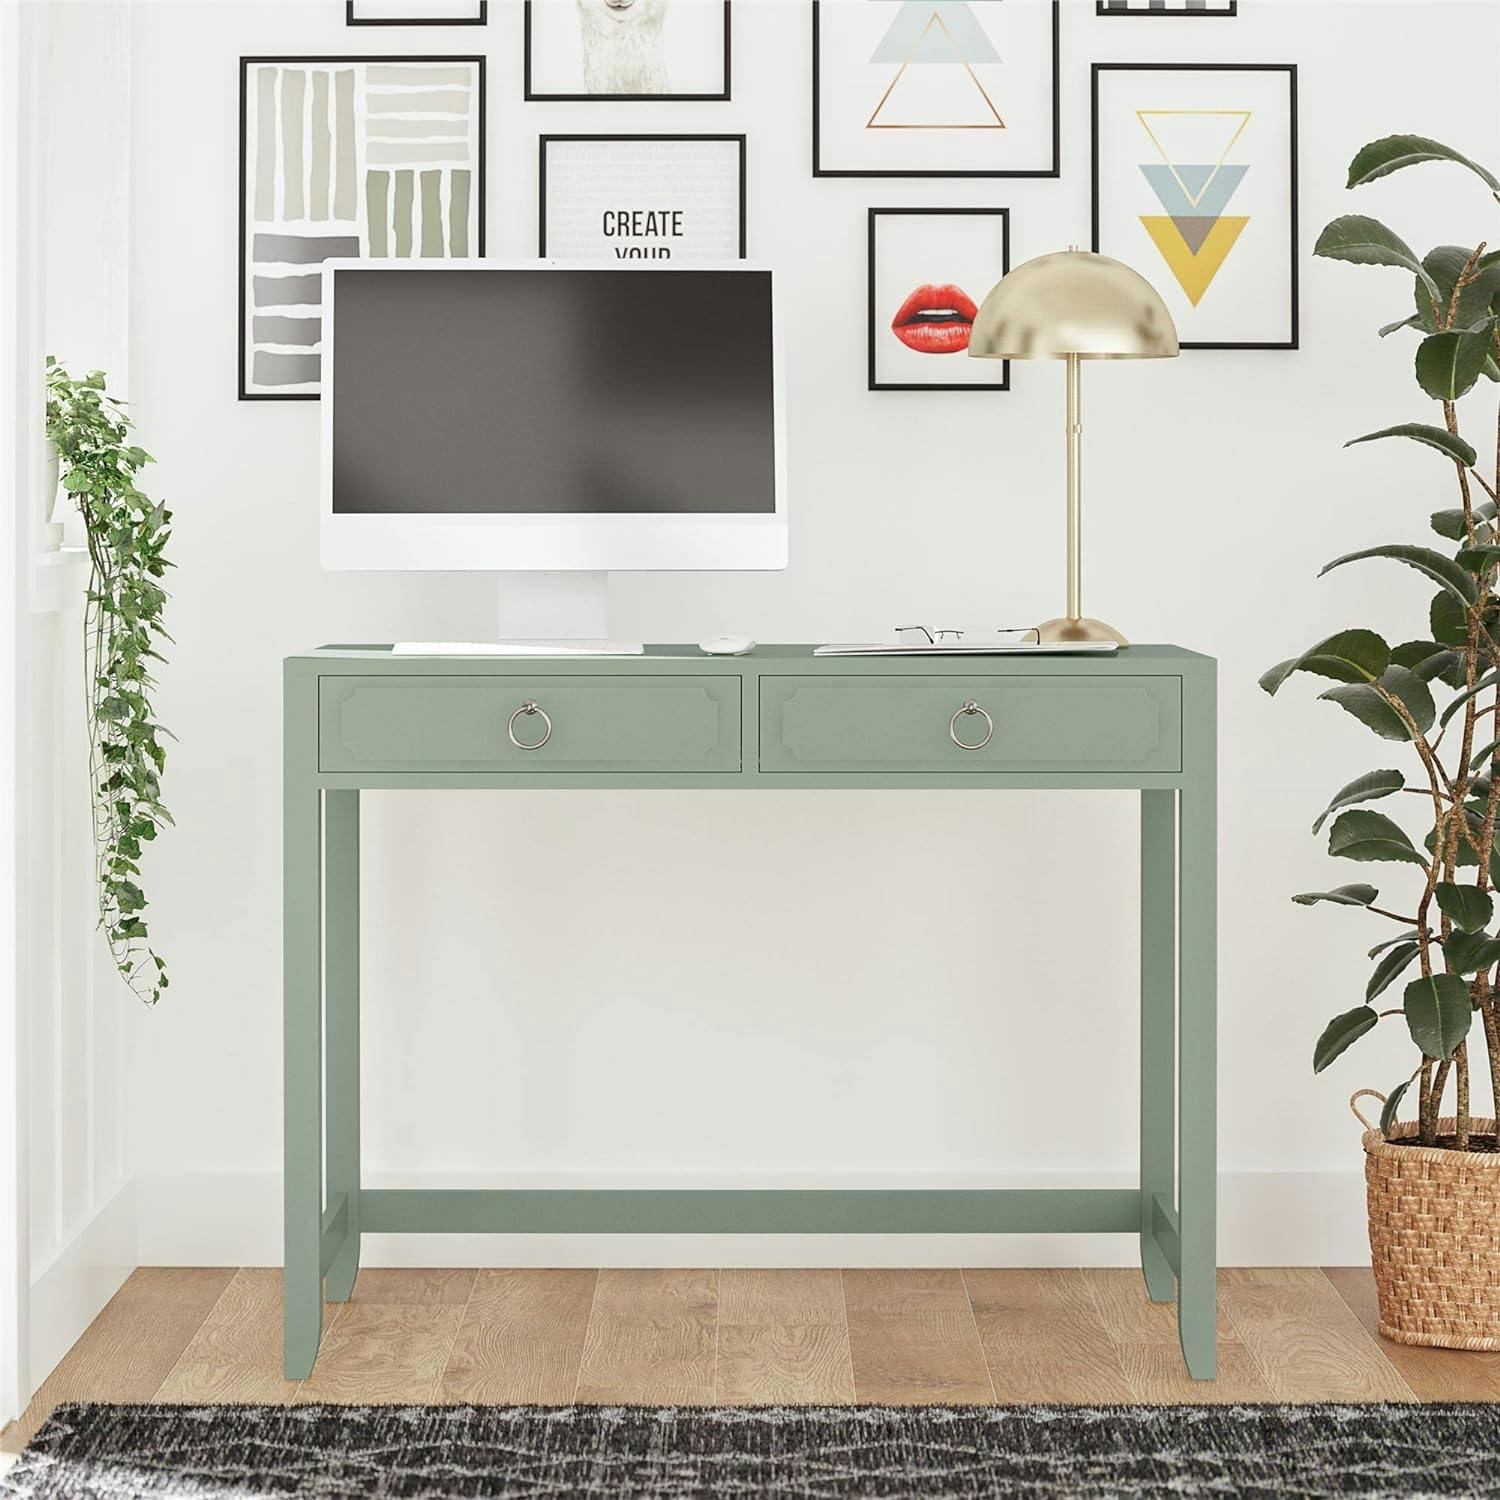 Elegant Pale Green 2-Drawer Writing Desk with Real Wood Legs